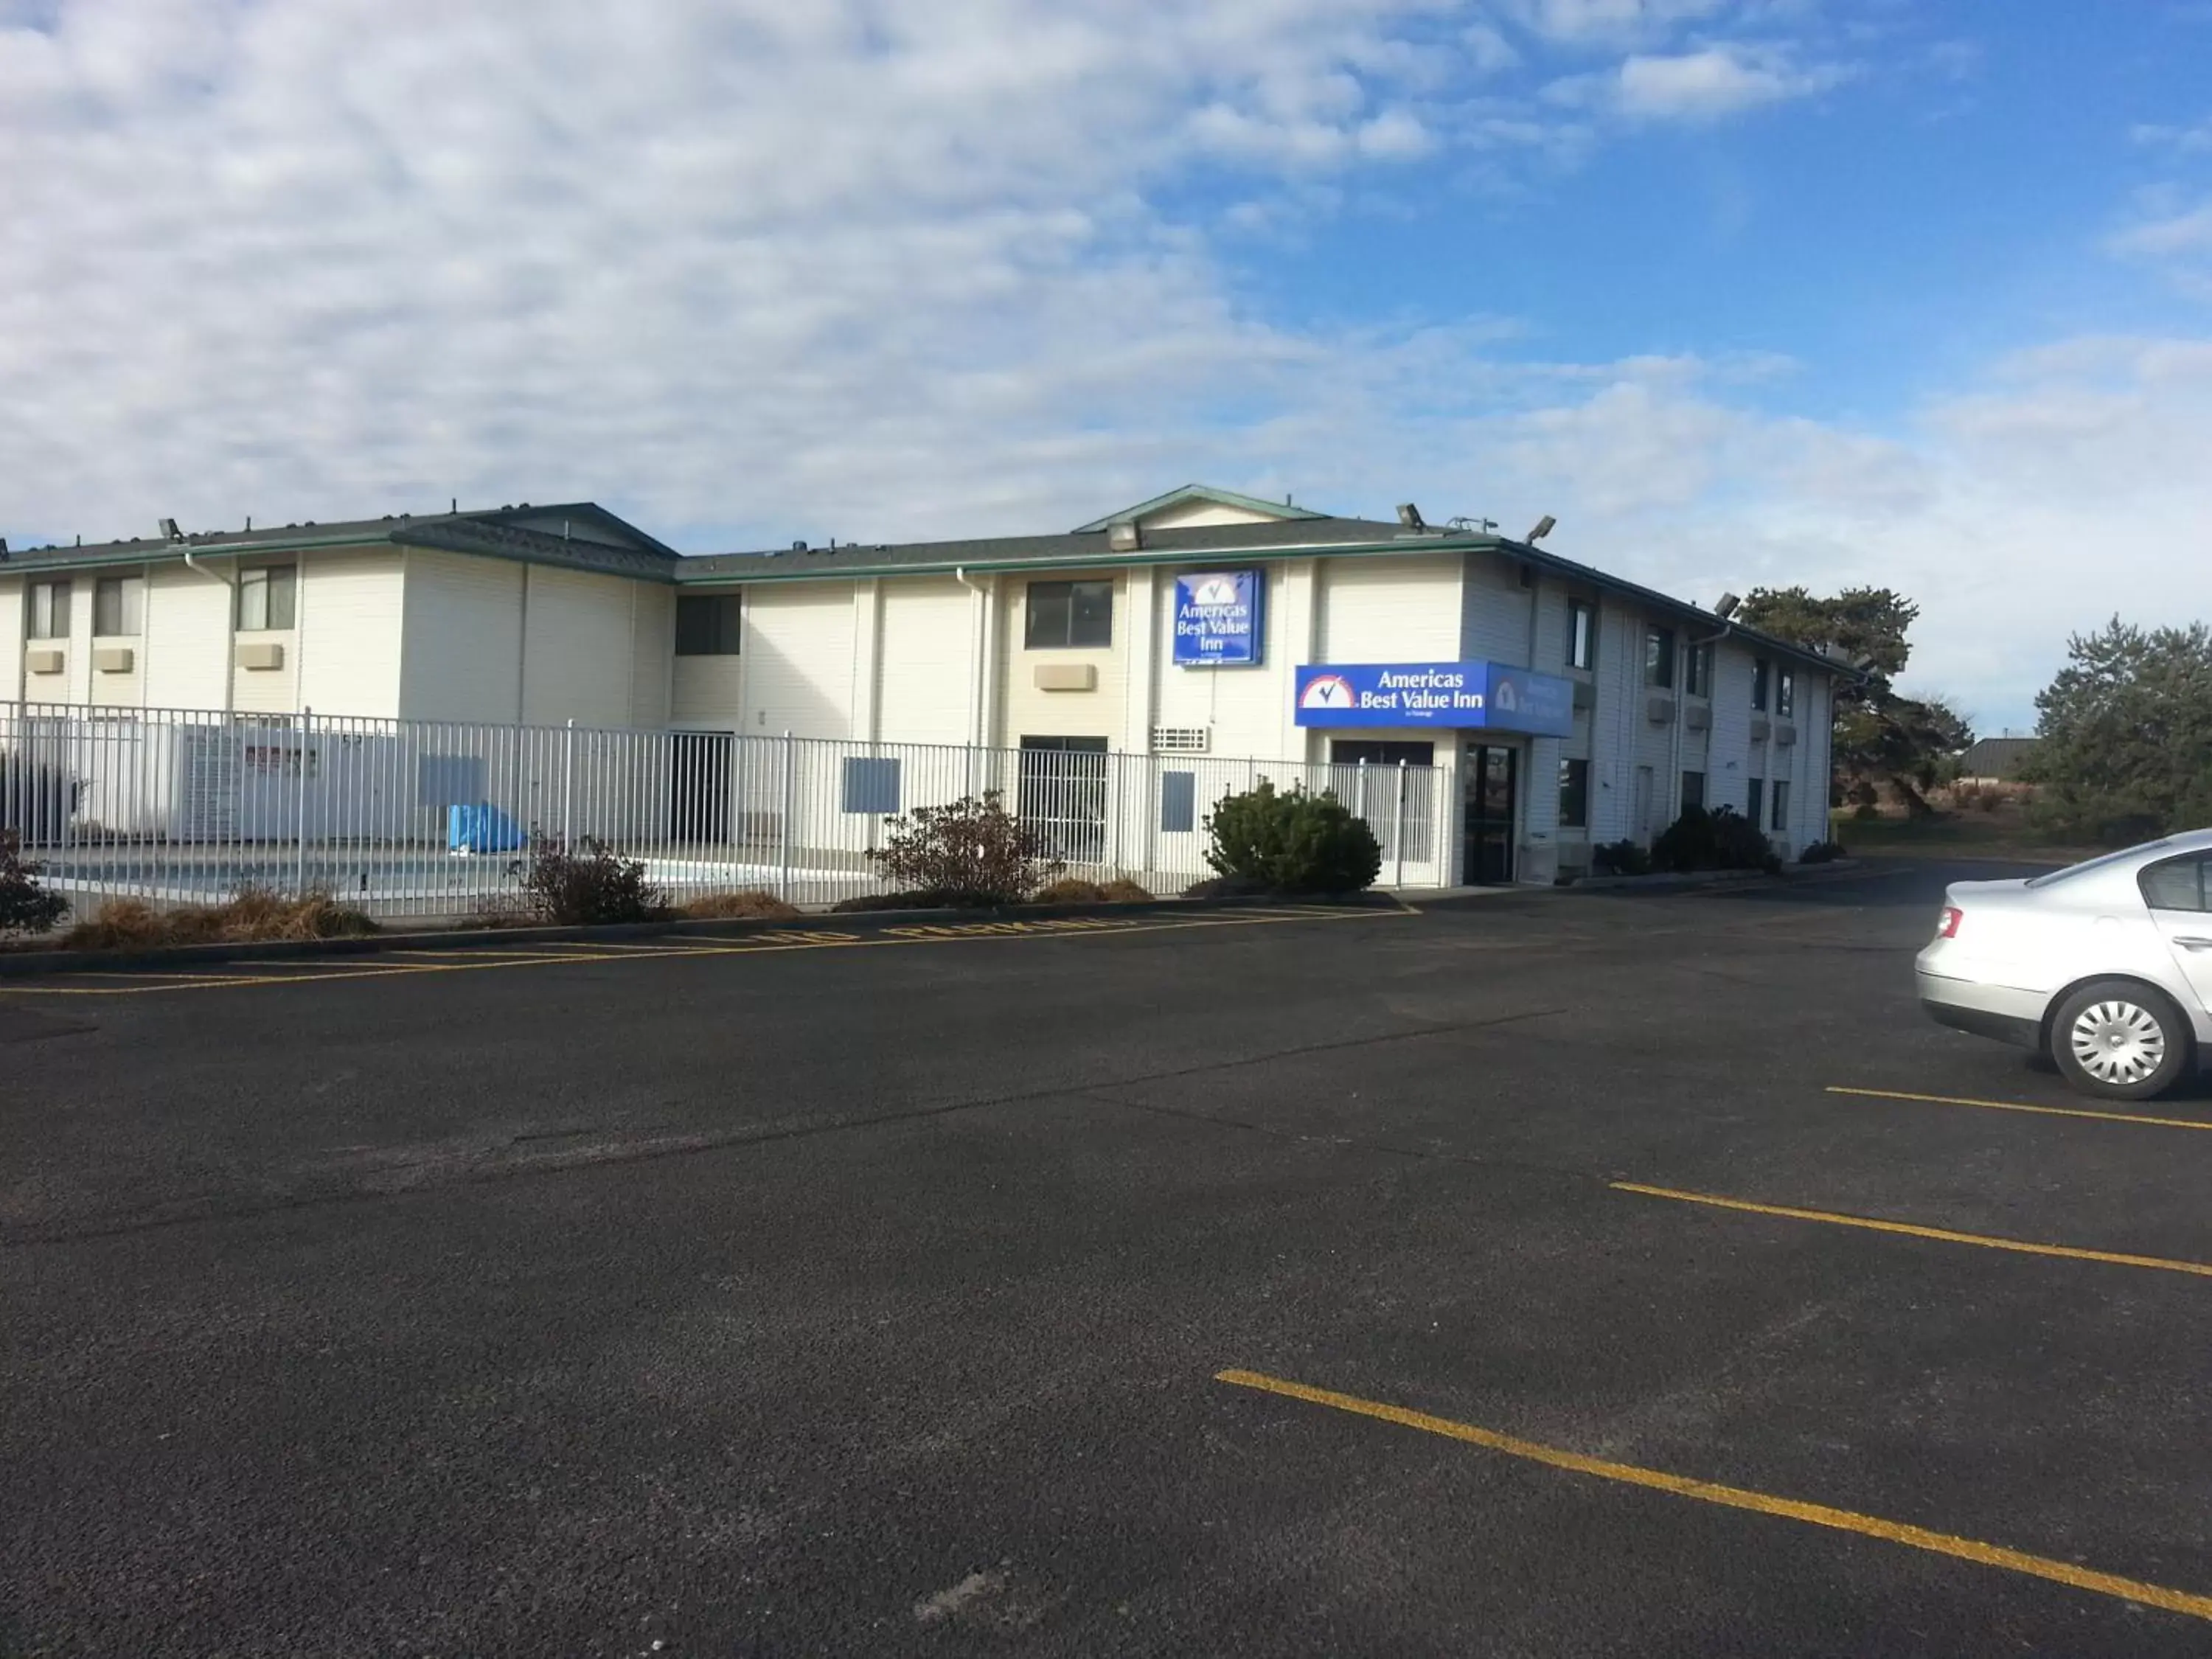 Street view, Property Building in Americas Best Value Inn - Lincoln Airport